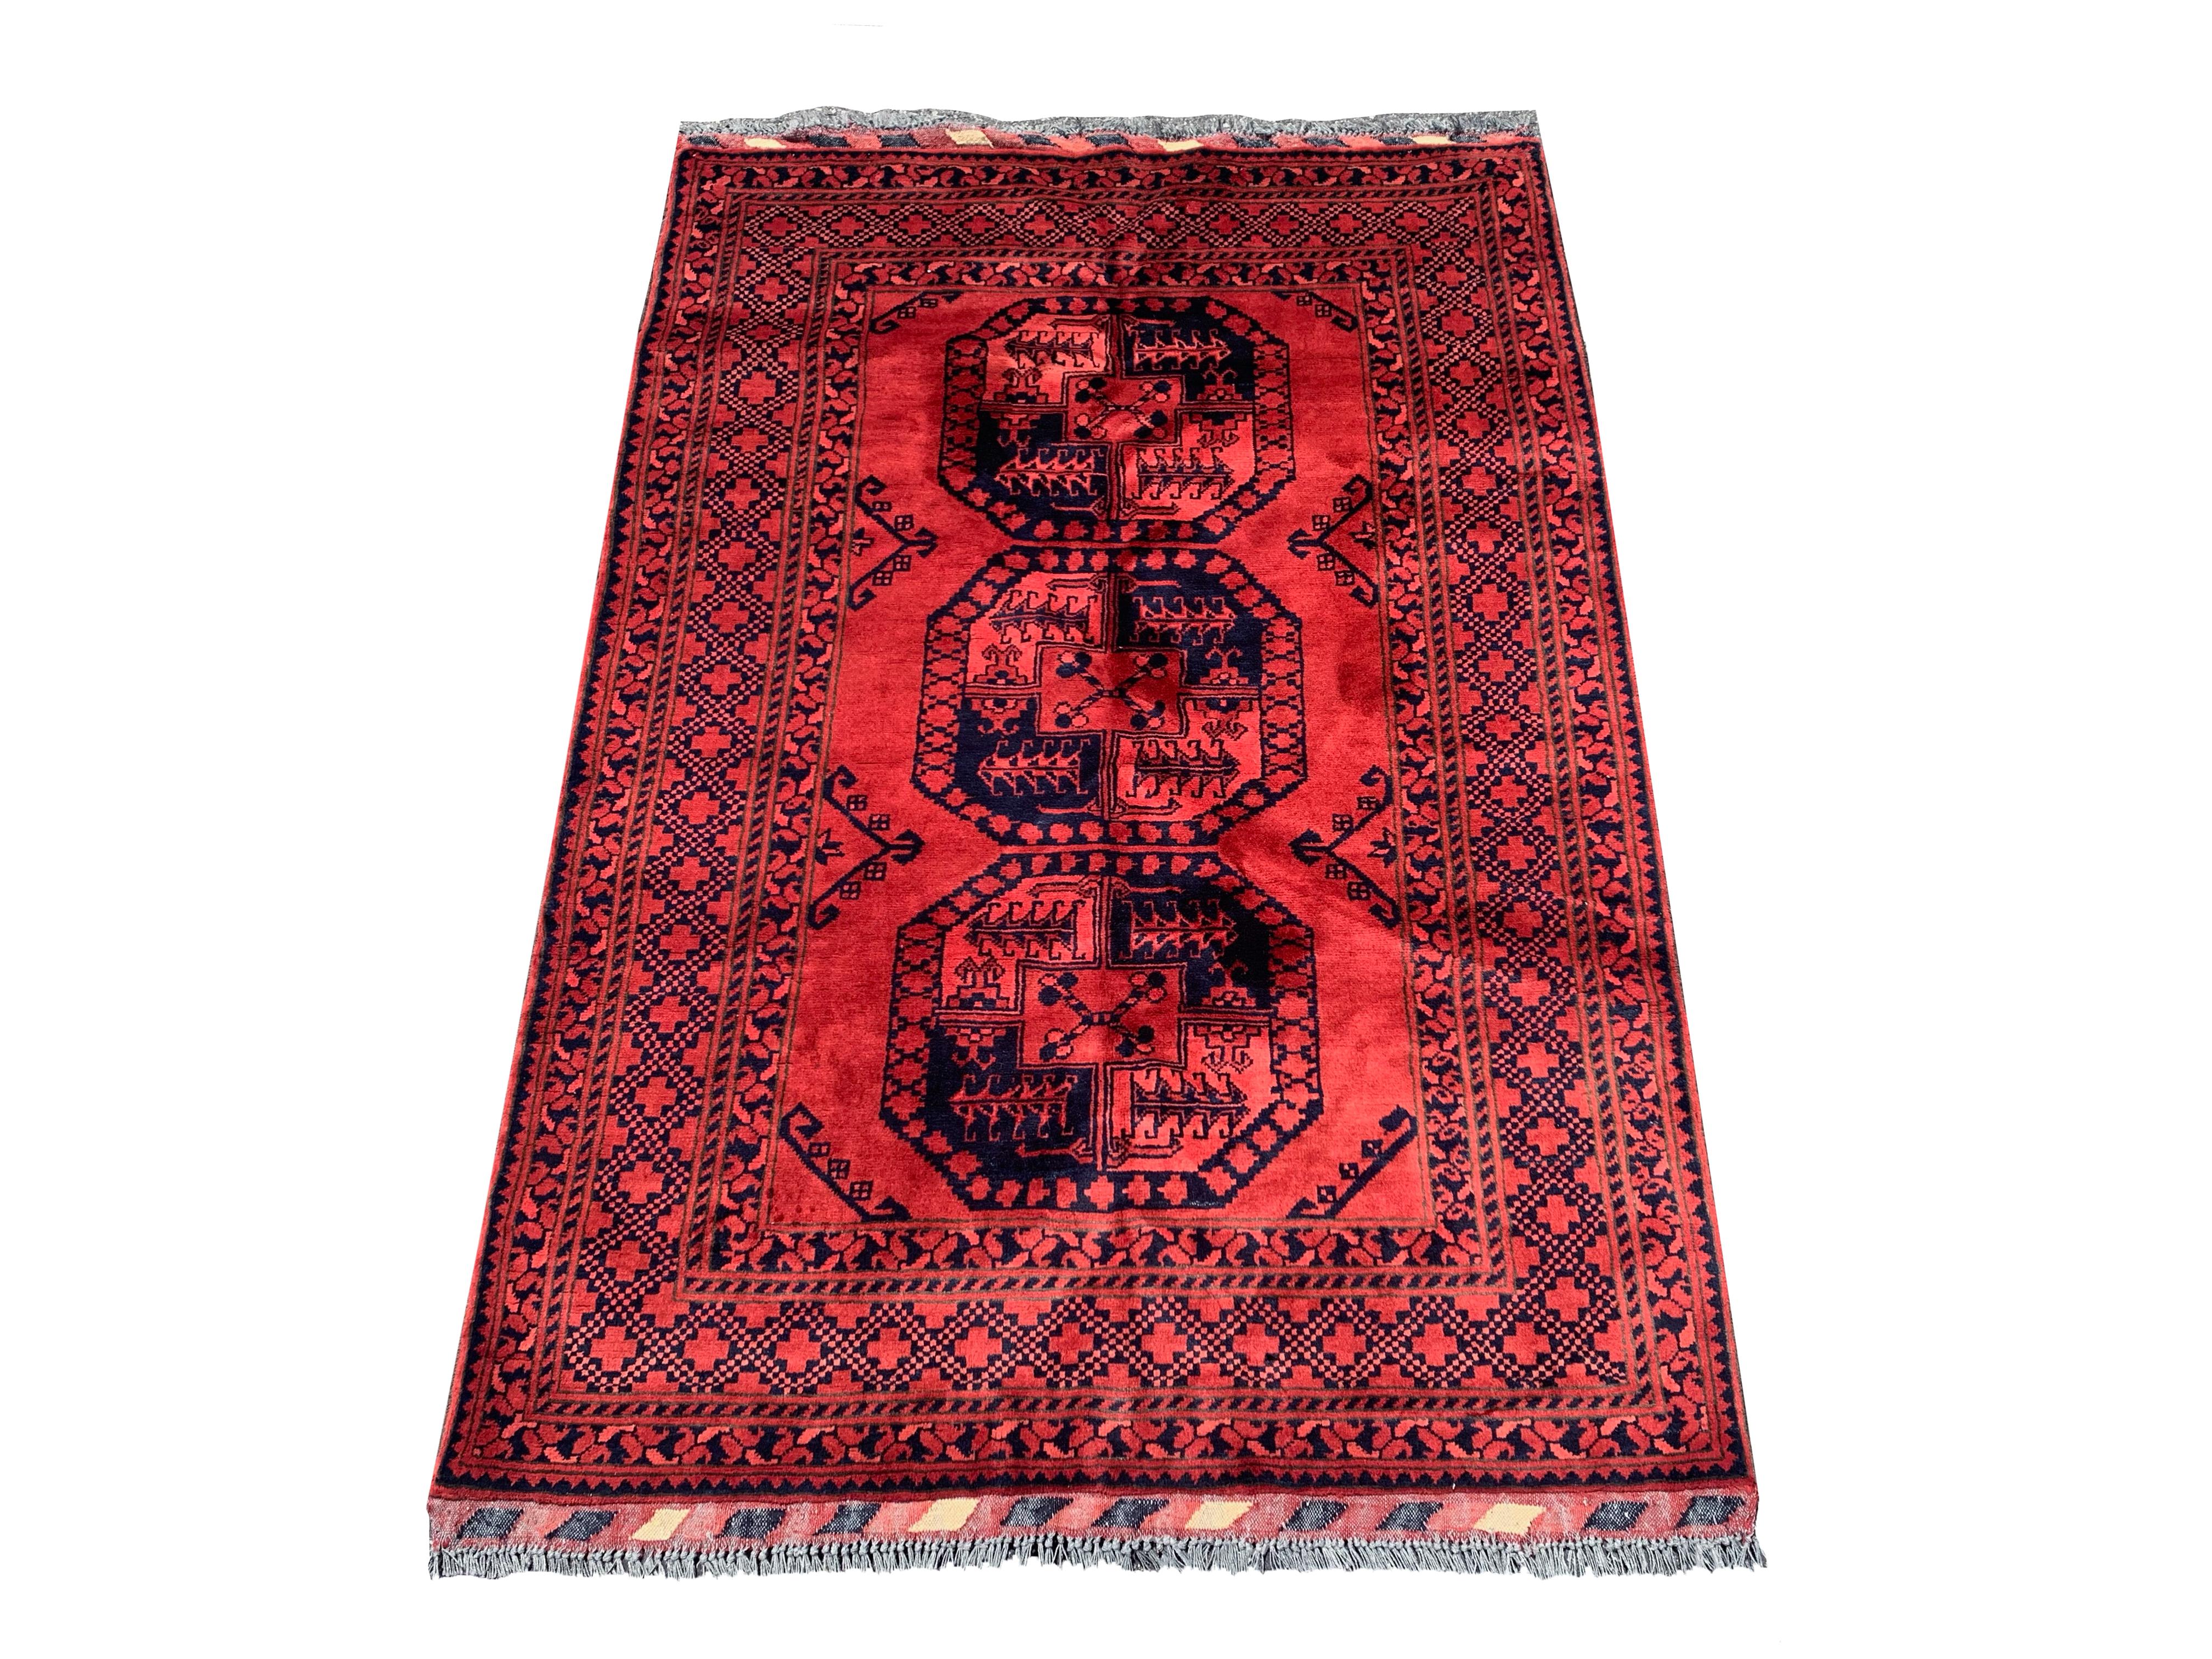 Hand-knotted wool pile on a cotton foundation.

Dimensions: 4' x 6'

New

Origin: Afghanistan

Field Color: Red

Border Color: Red

Accent Color: Navy-Blue